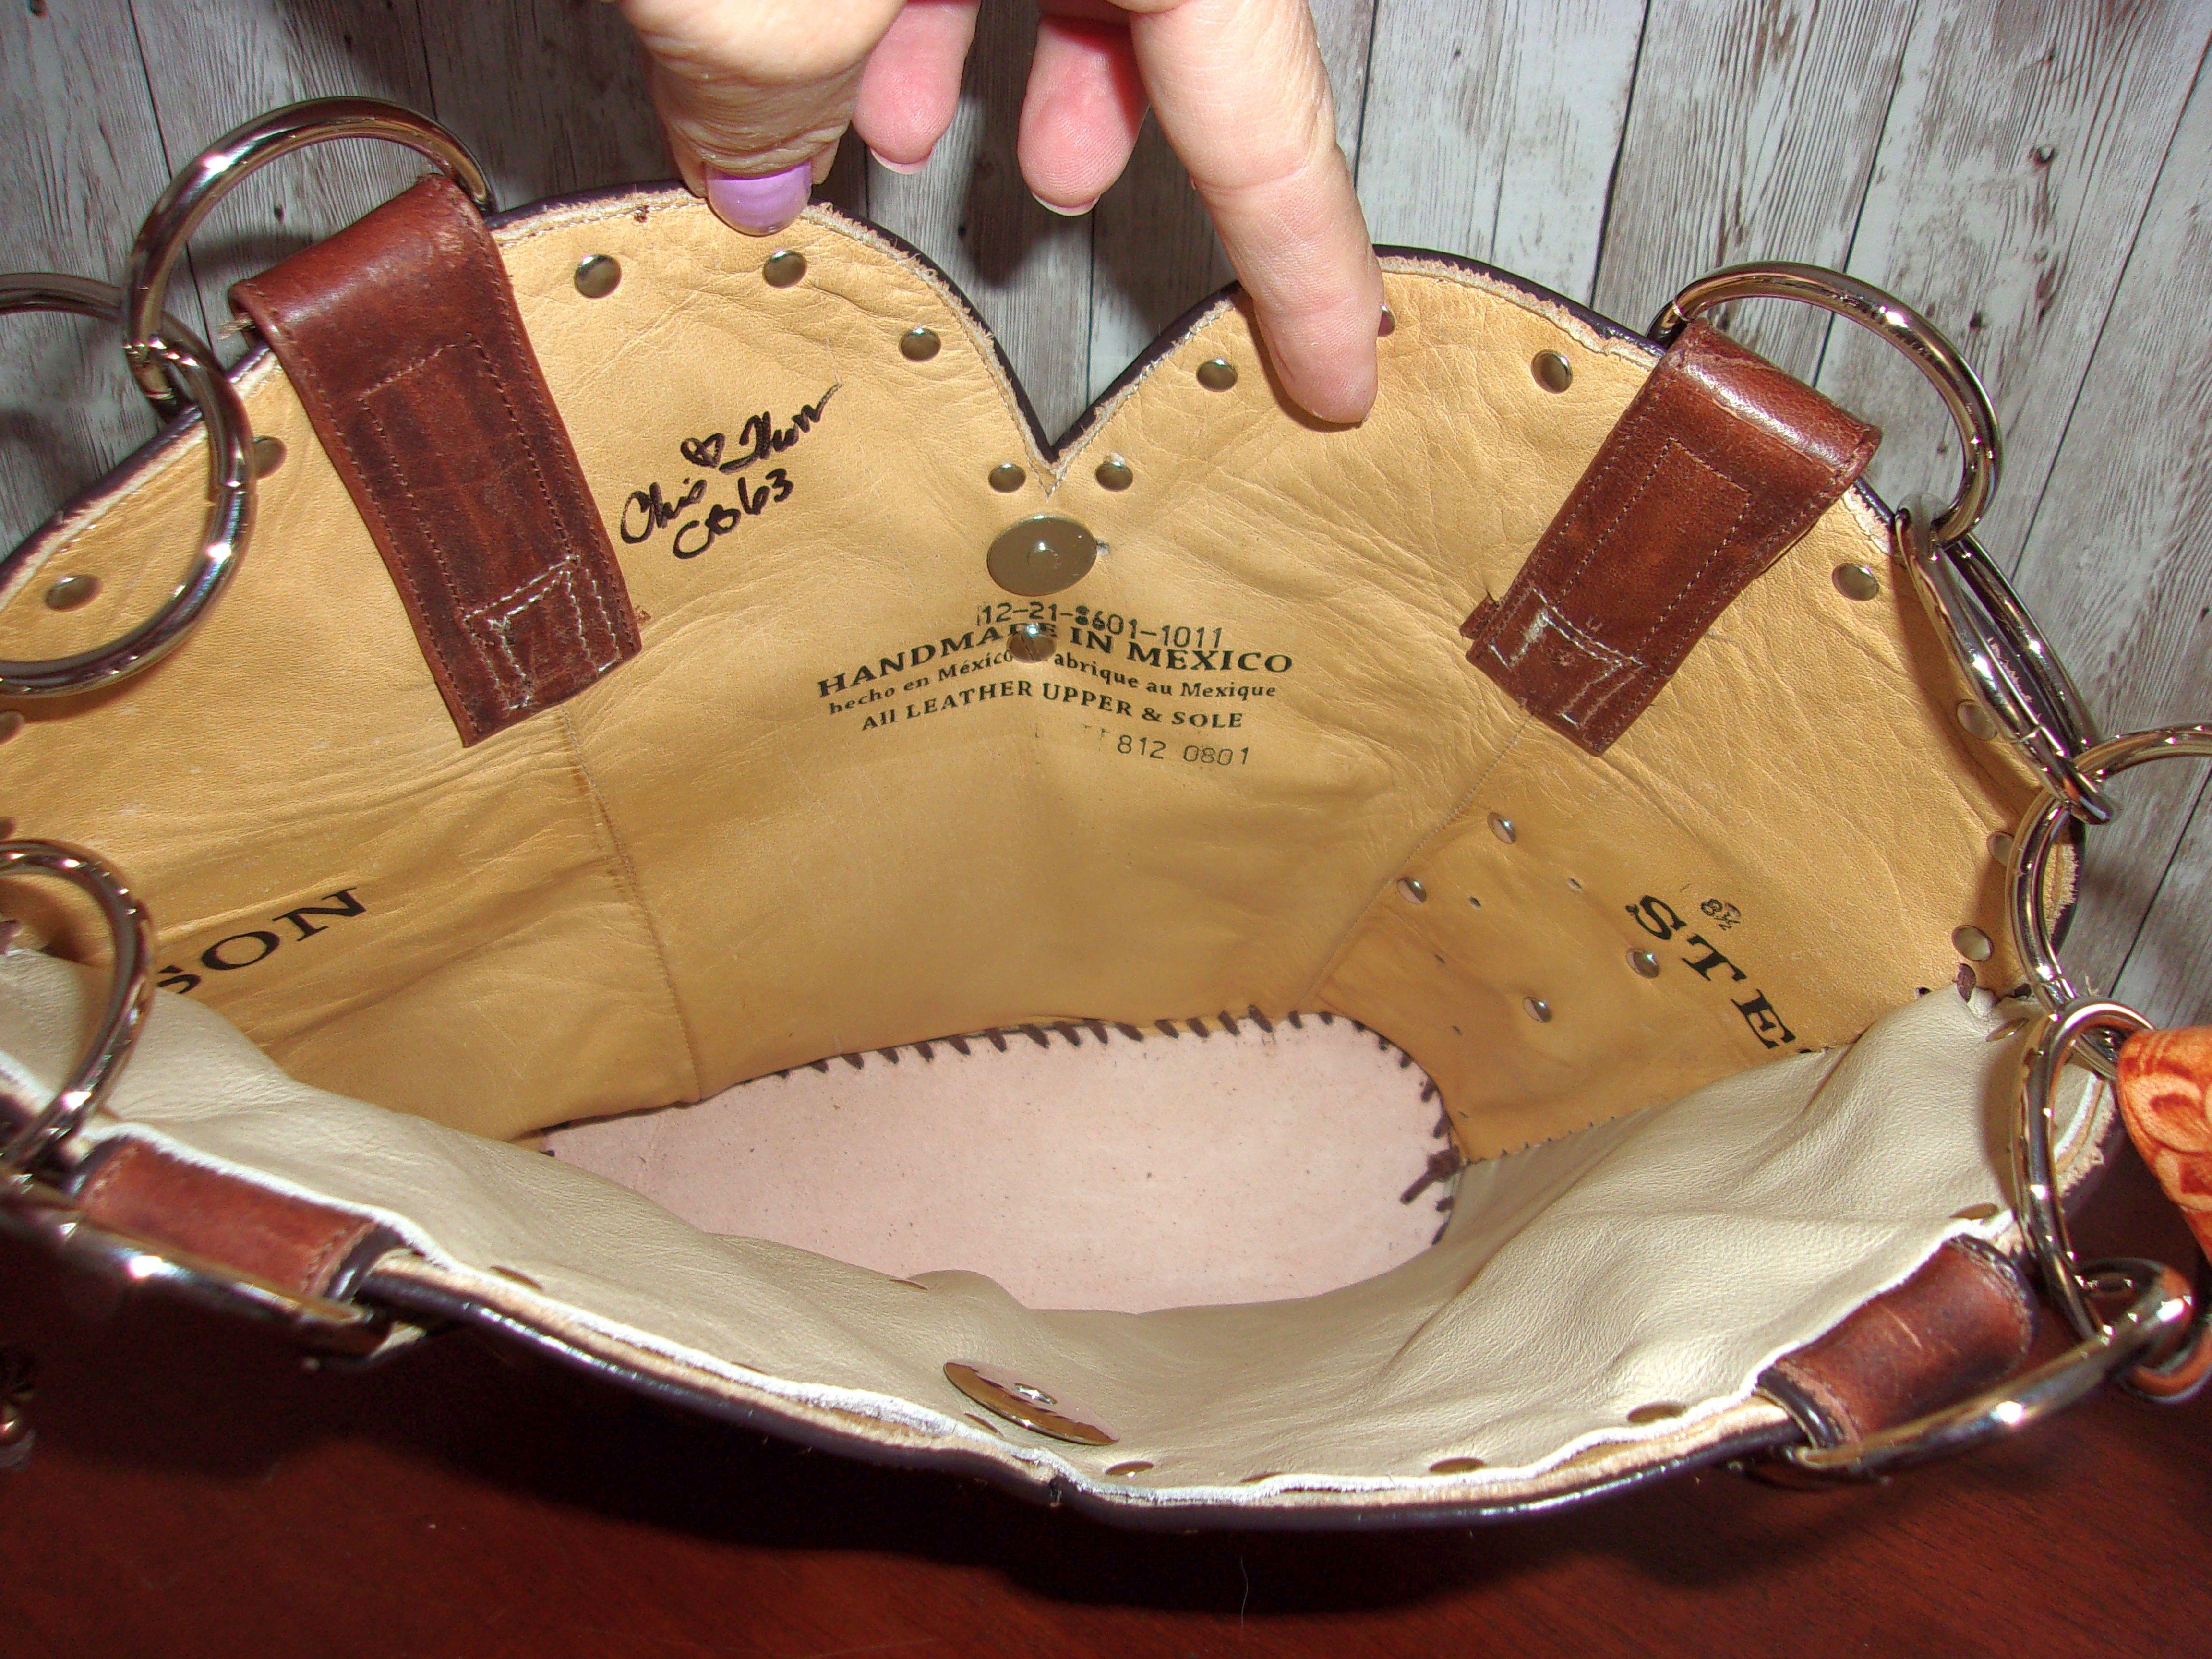 Western Concealed Carry Purse - CC Purse - Western Gun Purse - Handcrafted Conceal Carry Purse - Cowboy Boot Purse CB63 cowboy boot purses, western fringe purse, handmade leather purses, boot purse, handmade western purse, custom leather handbags Chris Thompson Bags